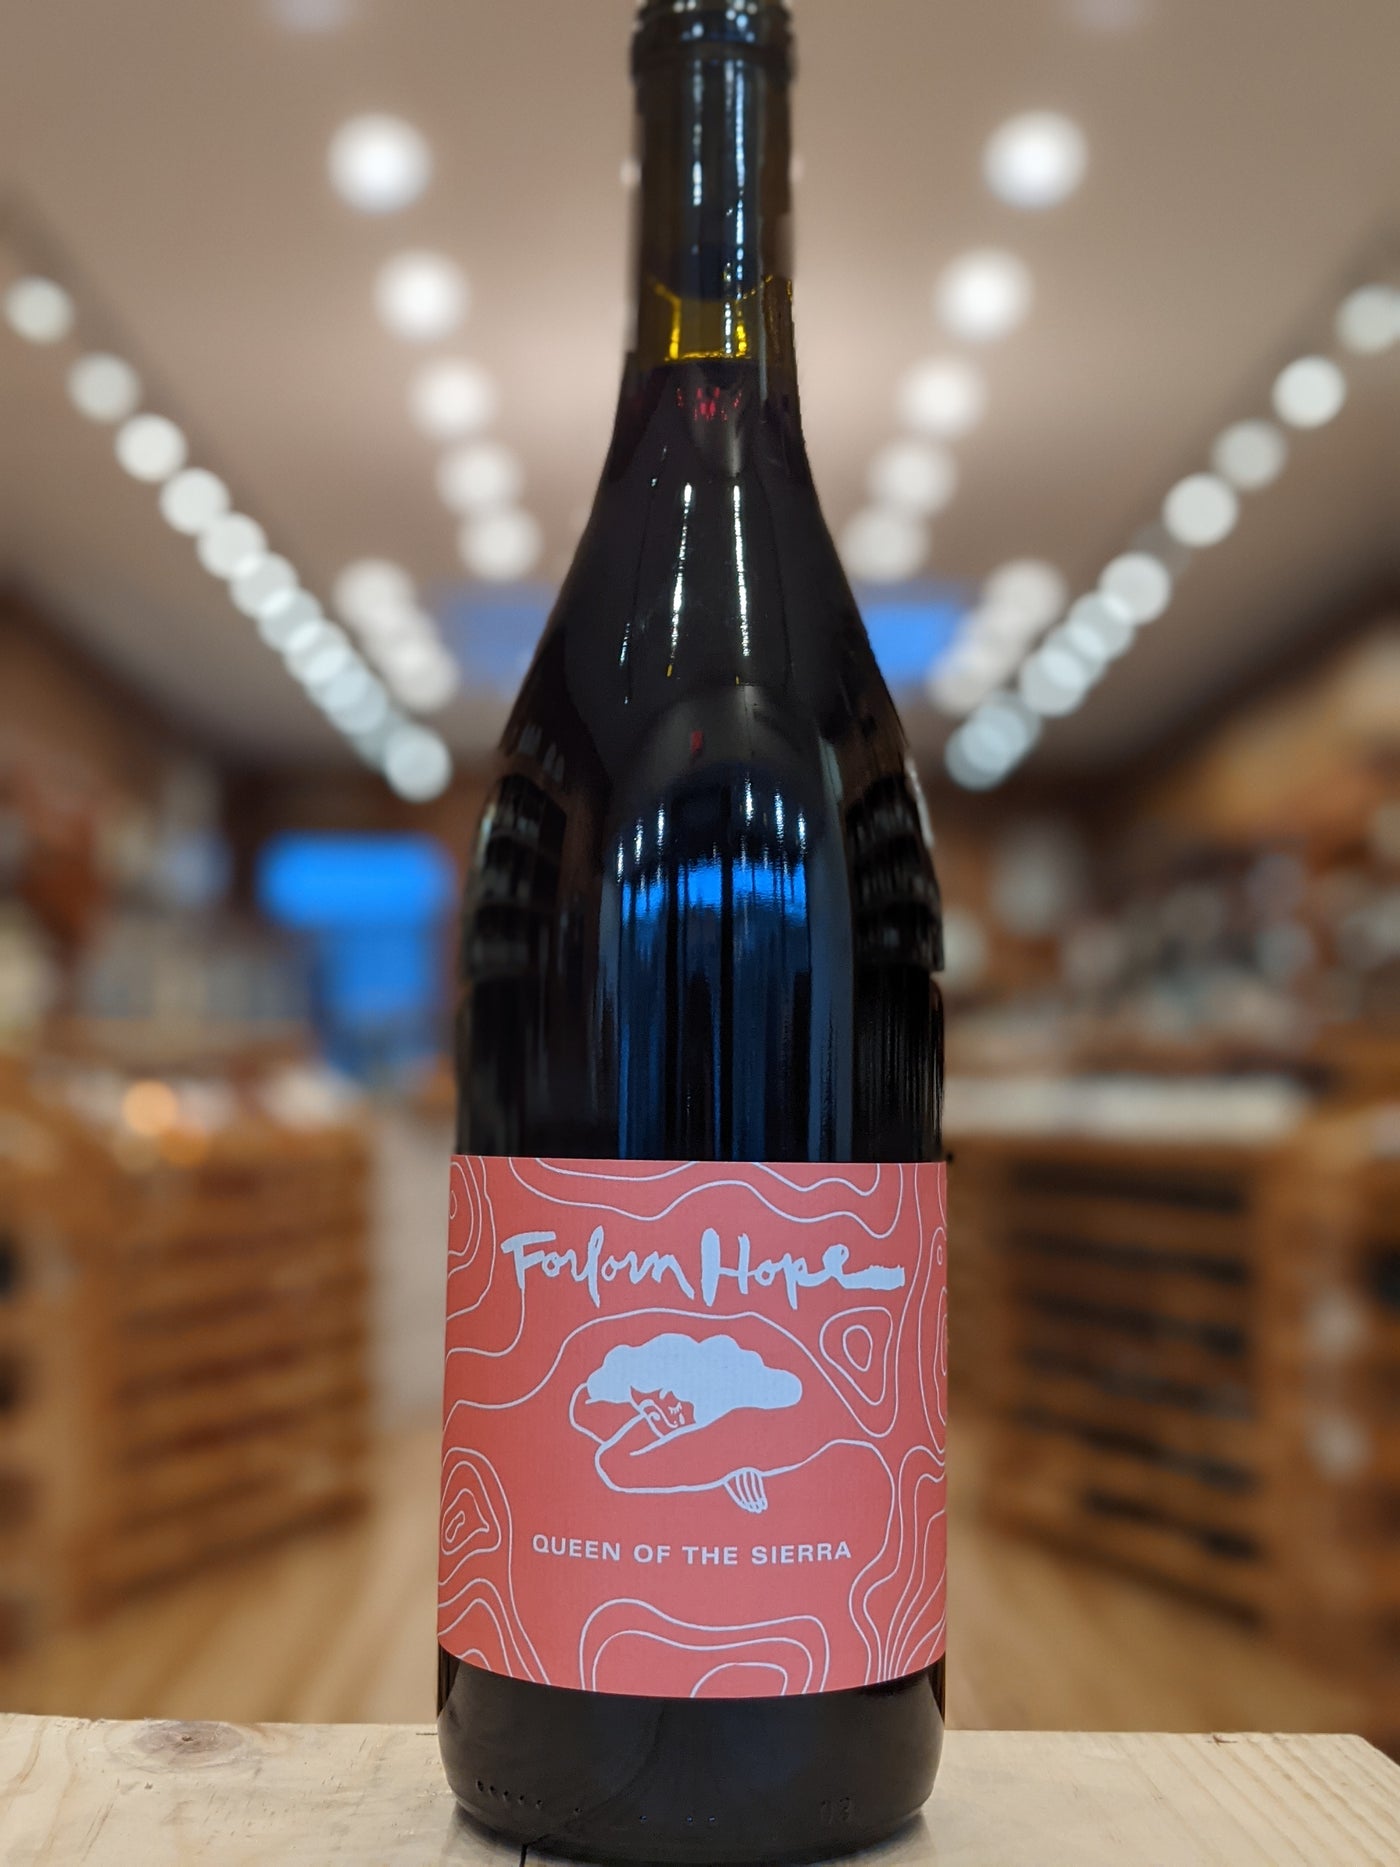 Forlorn Hope "Queen of the Sierra" Estate Red R HV 2018